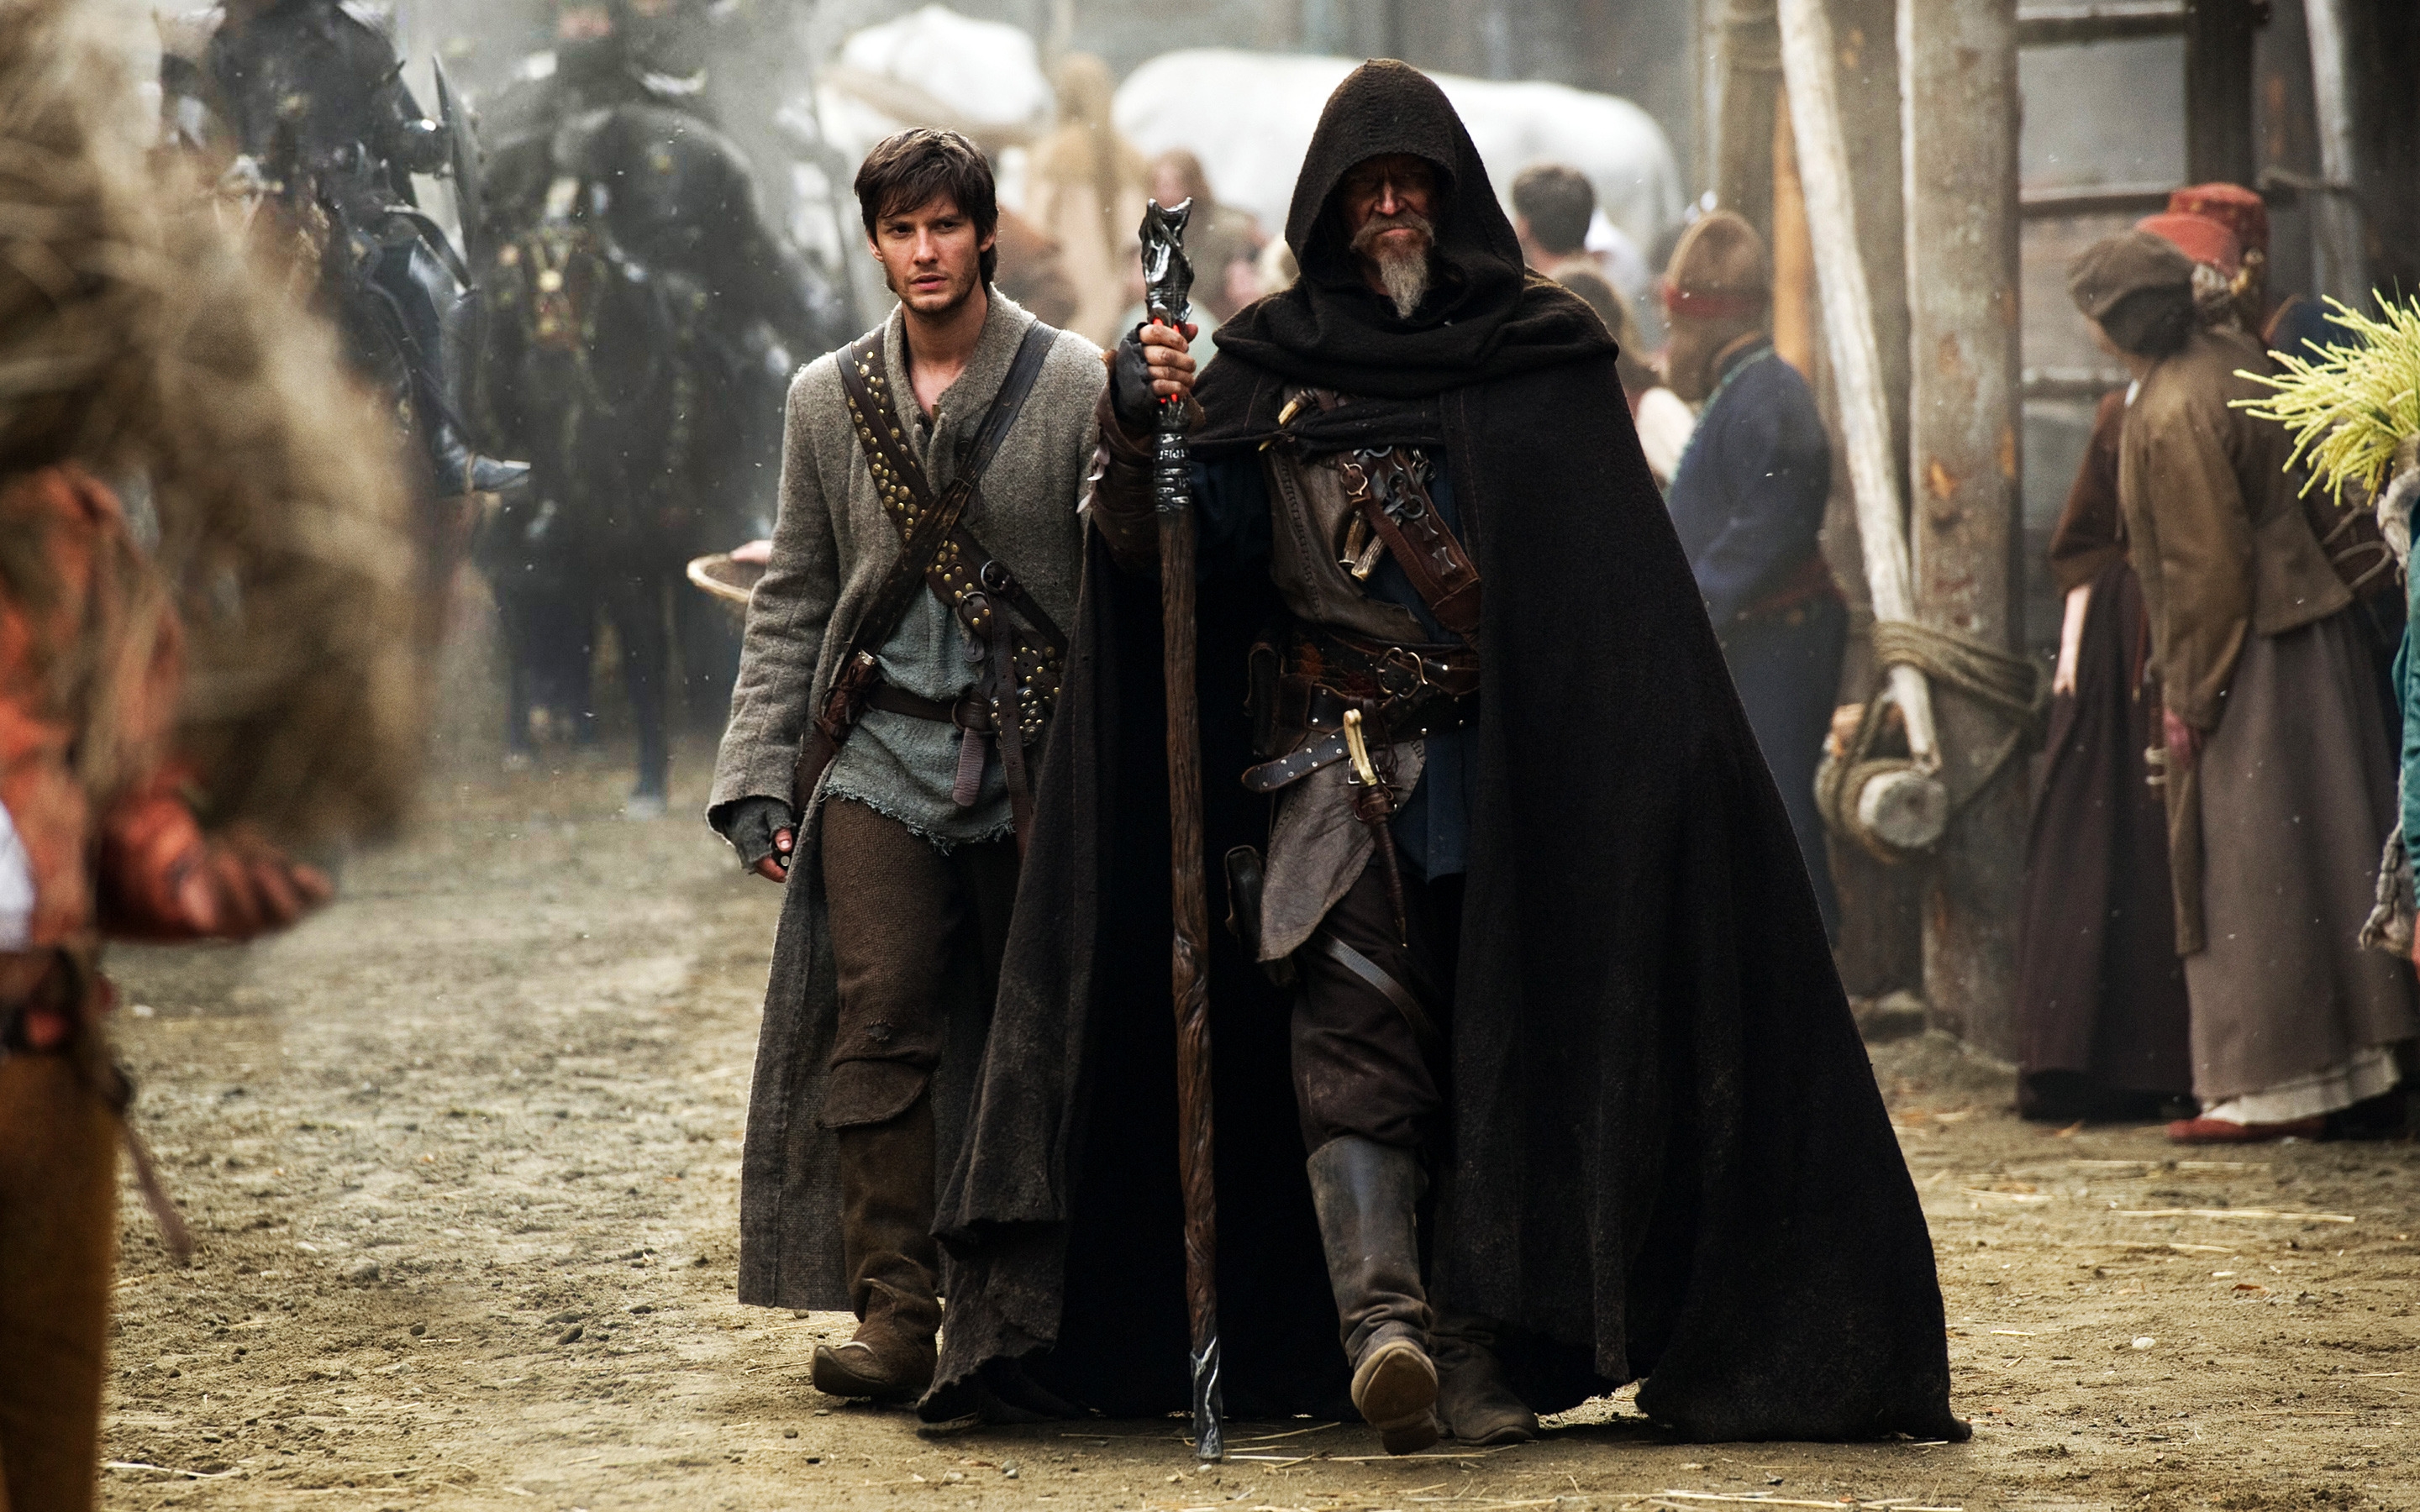 The Seventh Son Movie 2013 for 2880 x 1800 Retina Display resolution